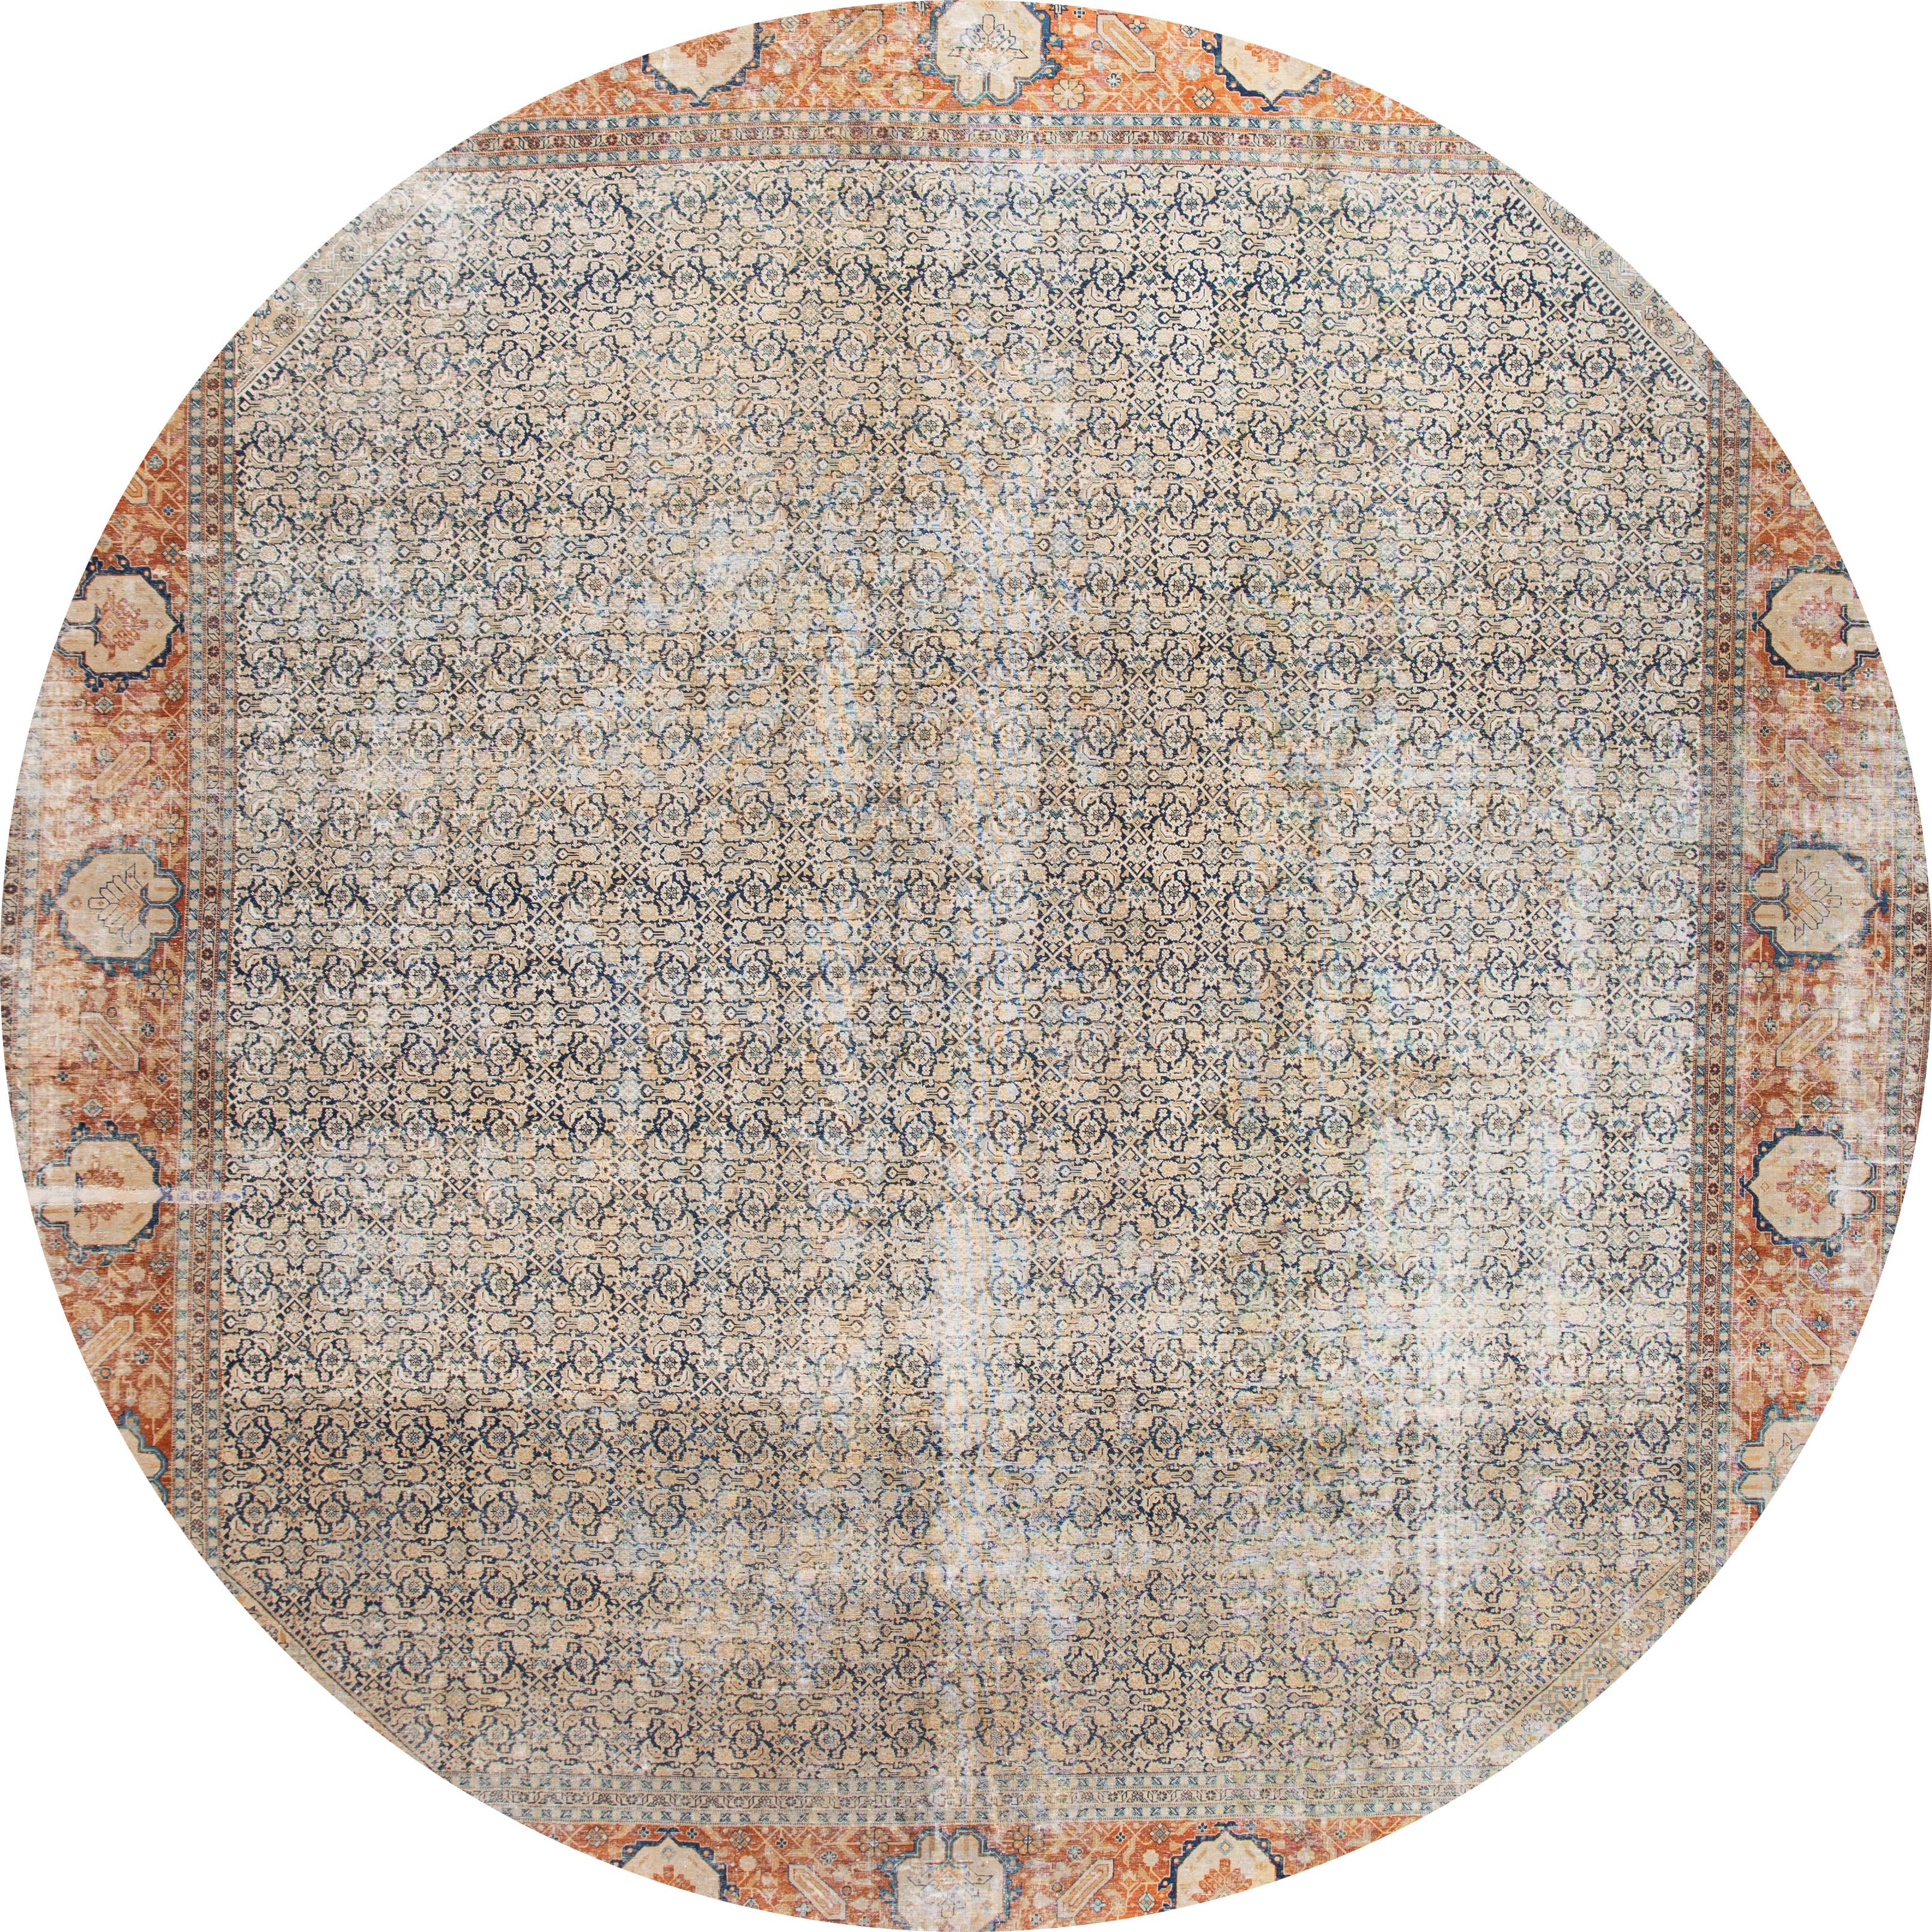 An antique distressed Tabriz square rug with a gray field and peach and blue accents in a symmetrical, interconnected floral and vine design. This hand knotted wool.
This rug measures: 13